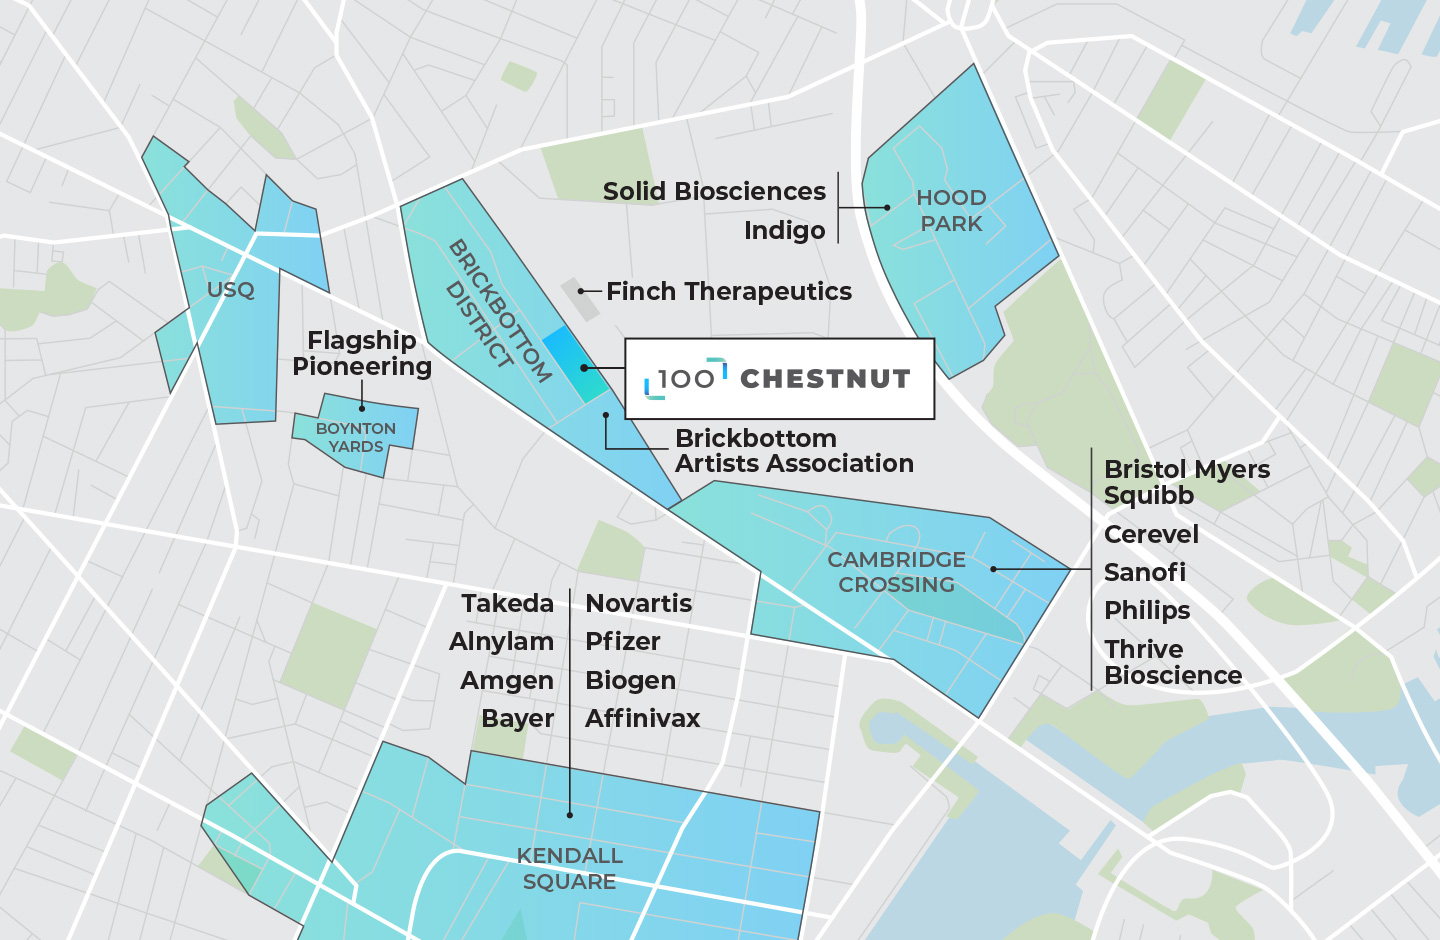 A map of the area around 100 Chesnut highlighting nearby Life Science companies in Kendall Square, Cambridge Crossing, Hood Park, Boynton Yards, and USQ.